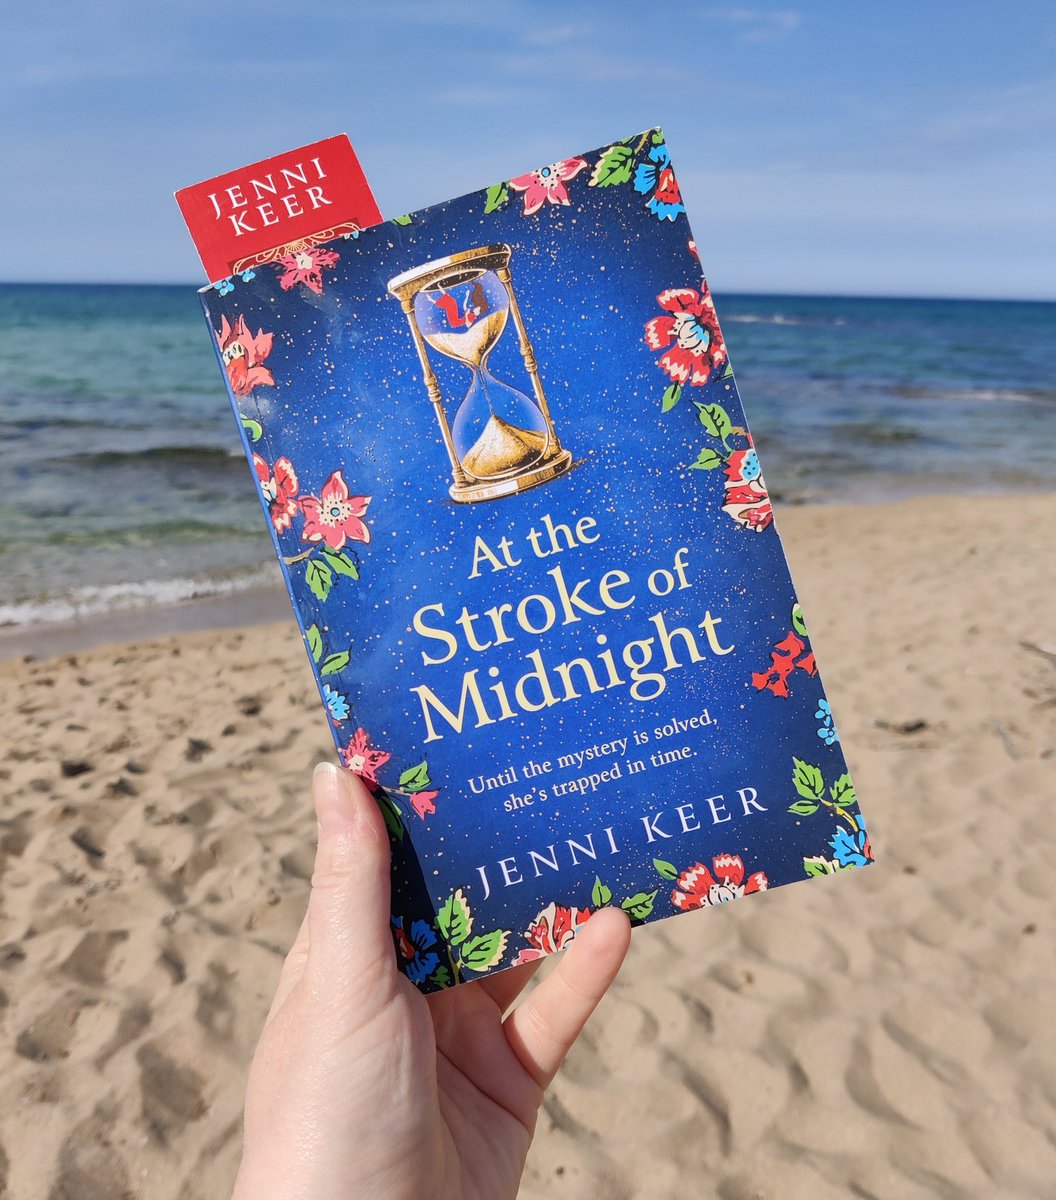 Travel to the glorious #Dorset coast for an adventure of a lifetime! ⛱️ Pearl Glenham is about to live one sunny summer afternoon numerous times in a desperate attempt to save her own life... #1920s #histfic #groundhogday #cosycrime Buy here: mybook.to/strokemidnight…